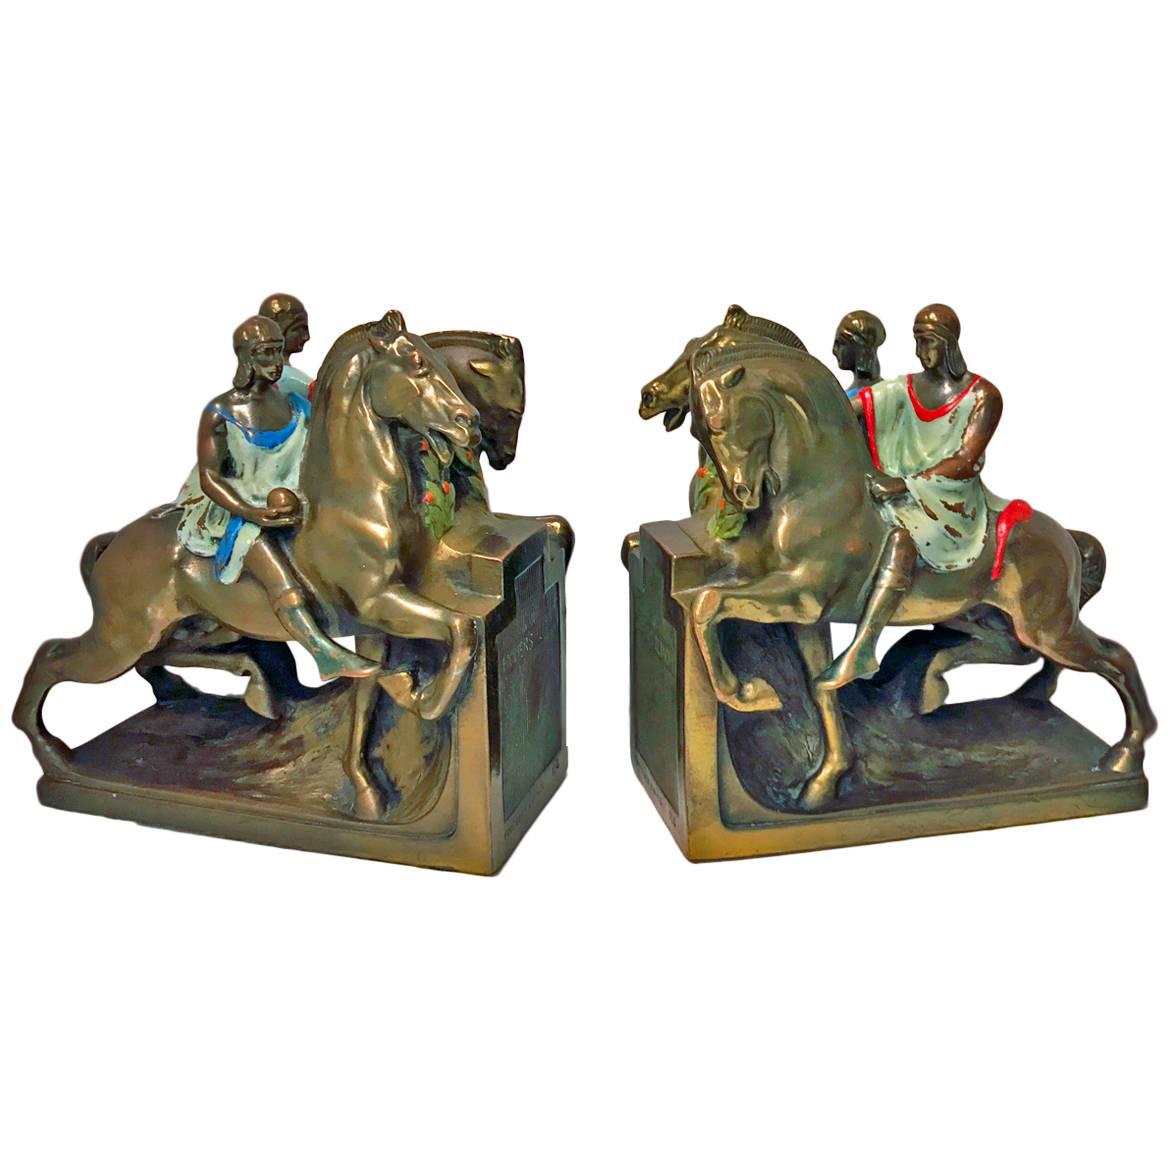 Large Pair of Bronze Clad Equestrian Bookends by Pompeian Bronze, circa 1920